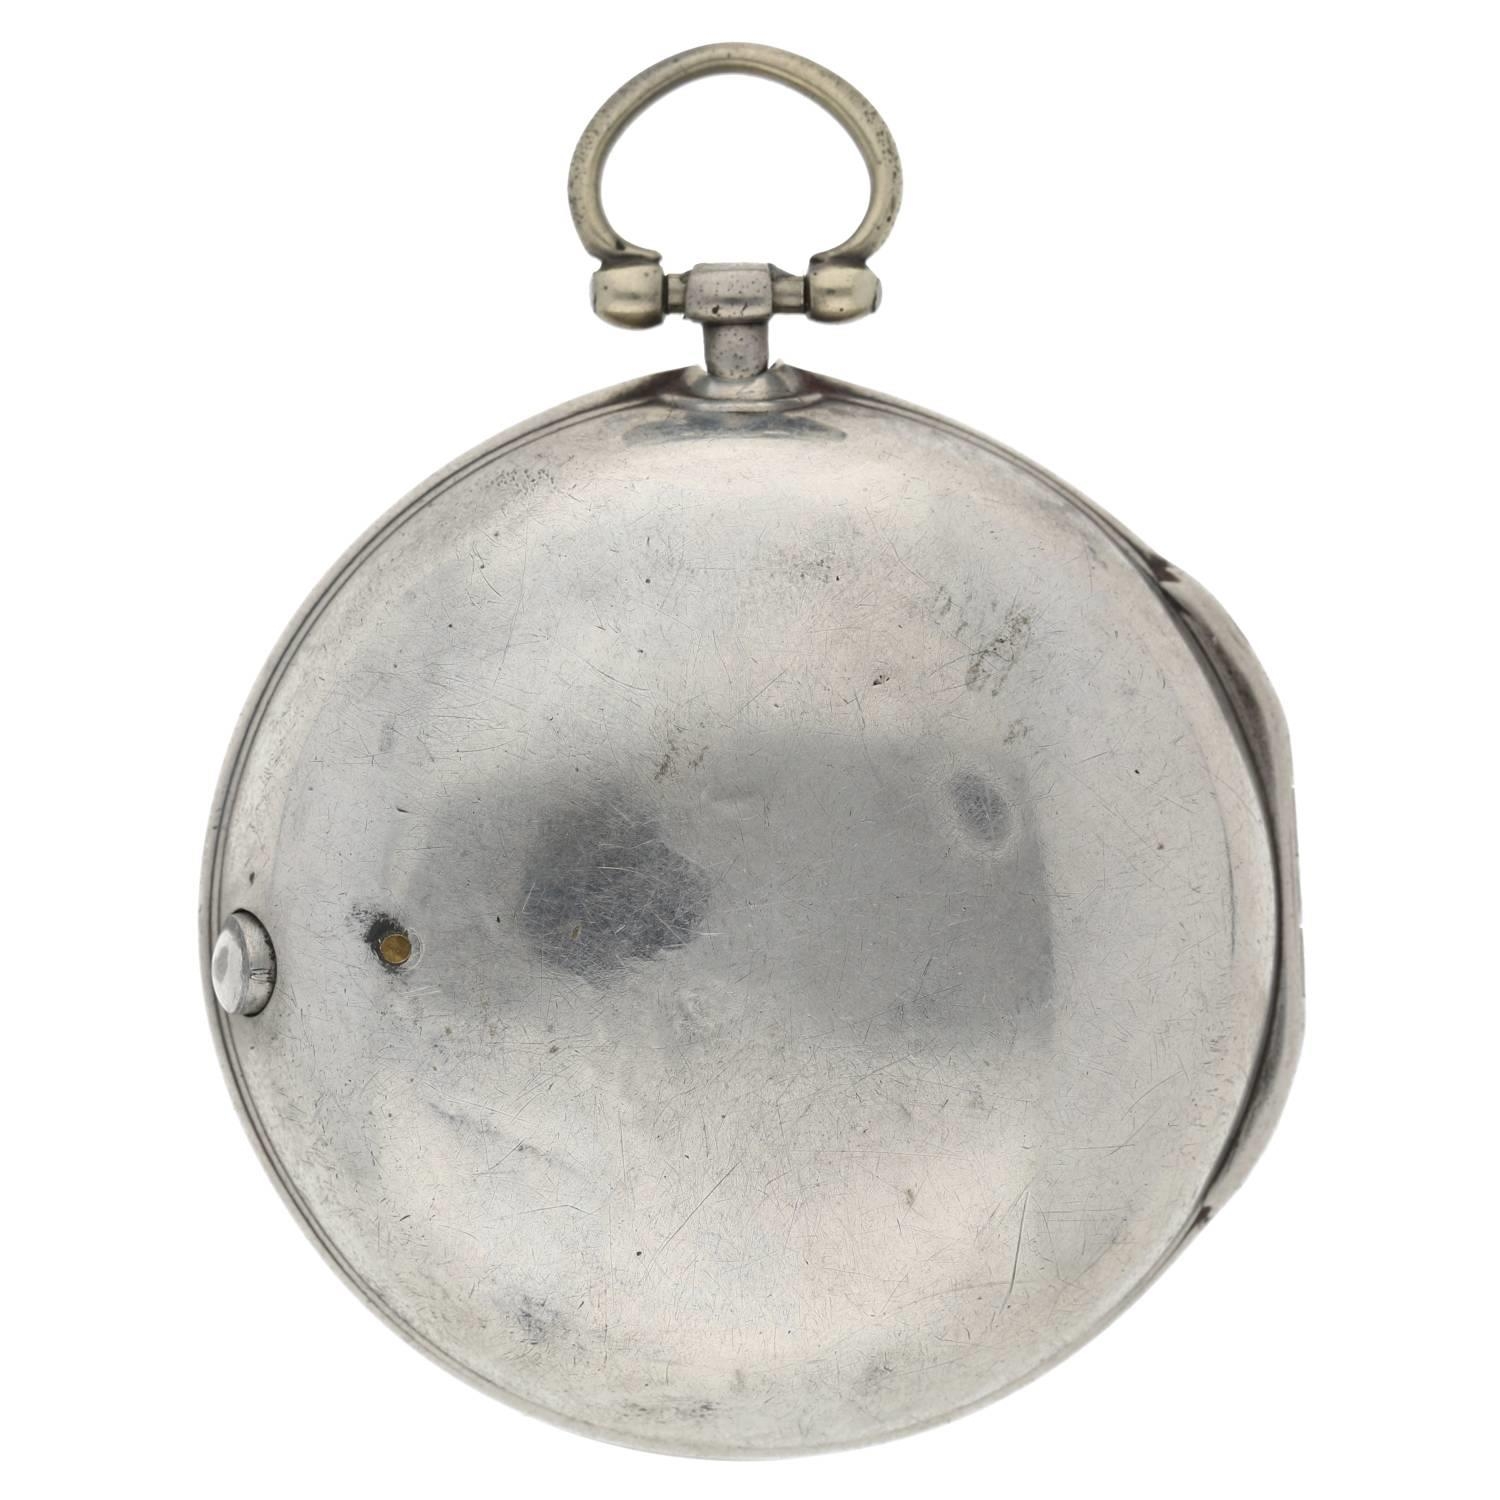 William Presbury, Coventry - English 18th century silver pair cased verge pocket watch, London 1763, - Image 8 of 10